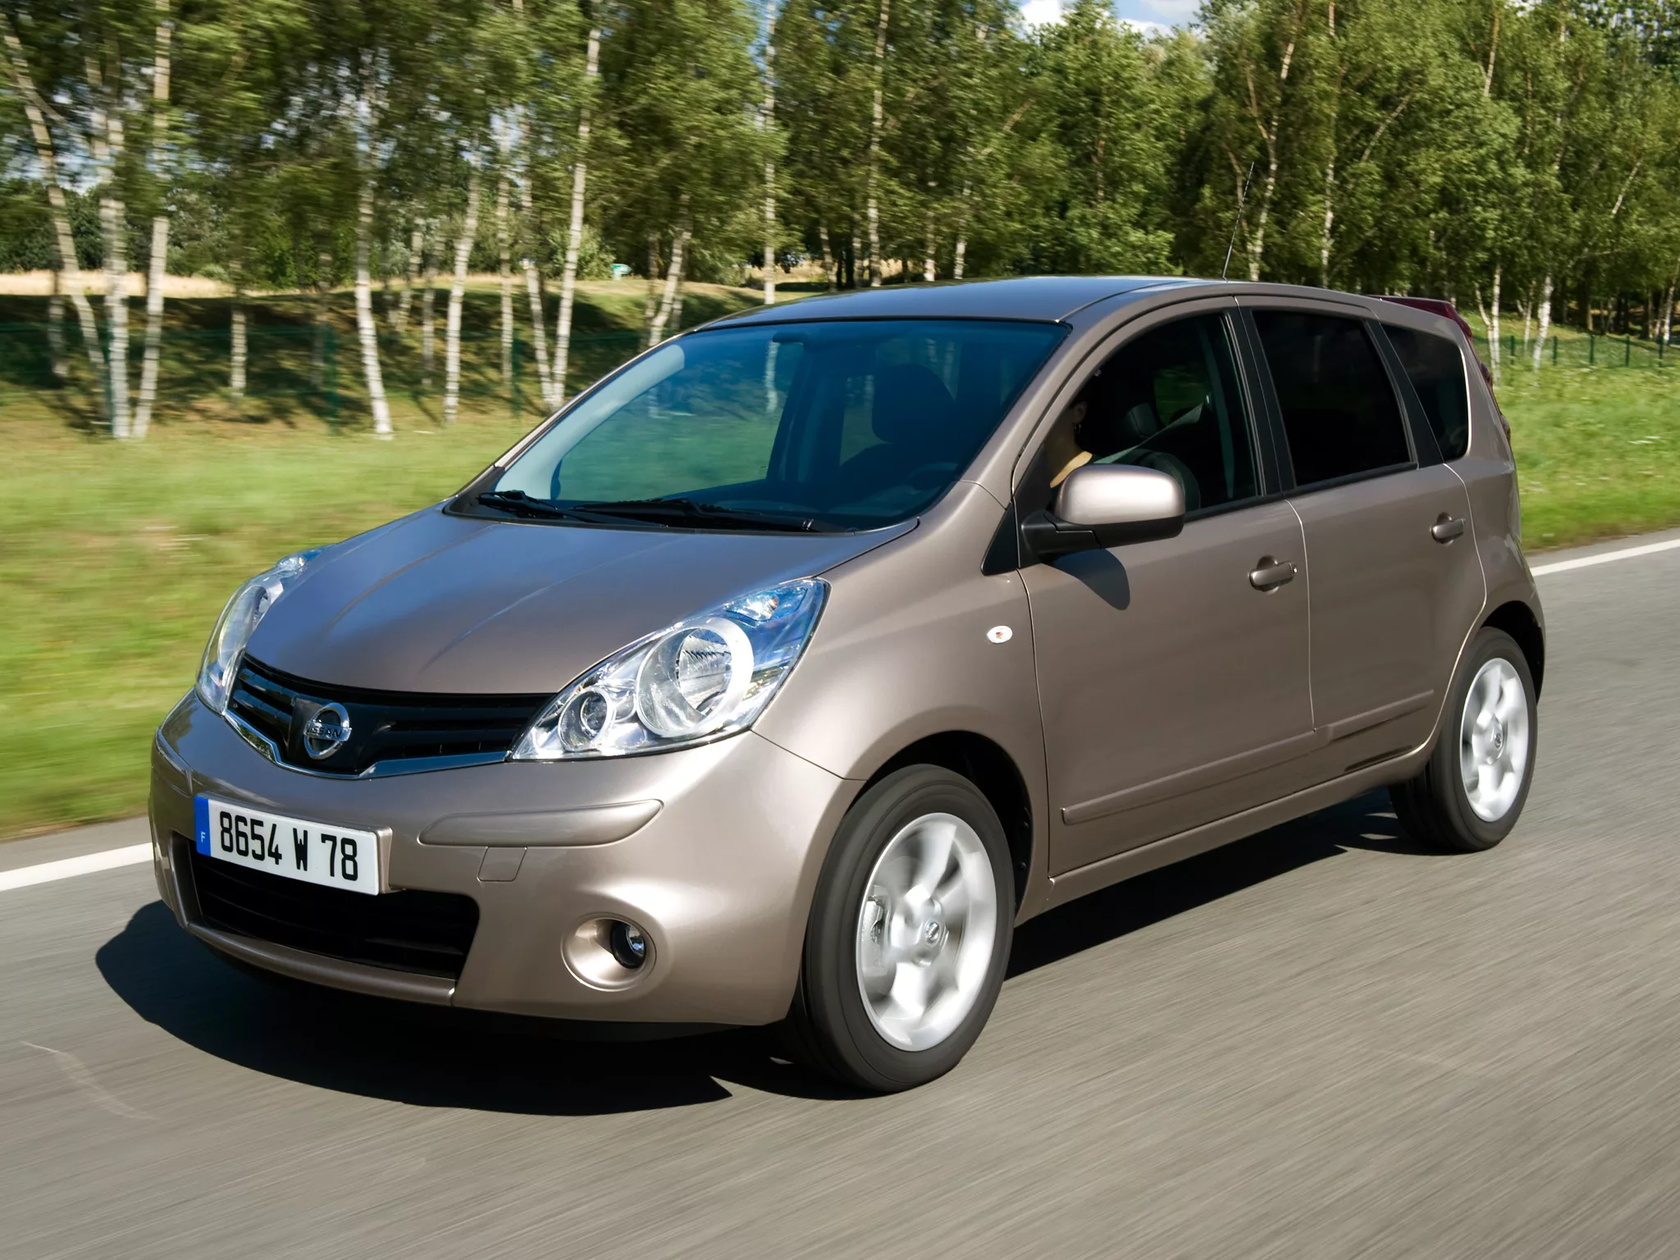 Note 11 2. Ниссан ноут е11. Nissan Note 2012. Nissan Note 2009. Nissan Note e11 2010.